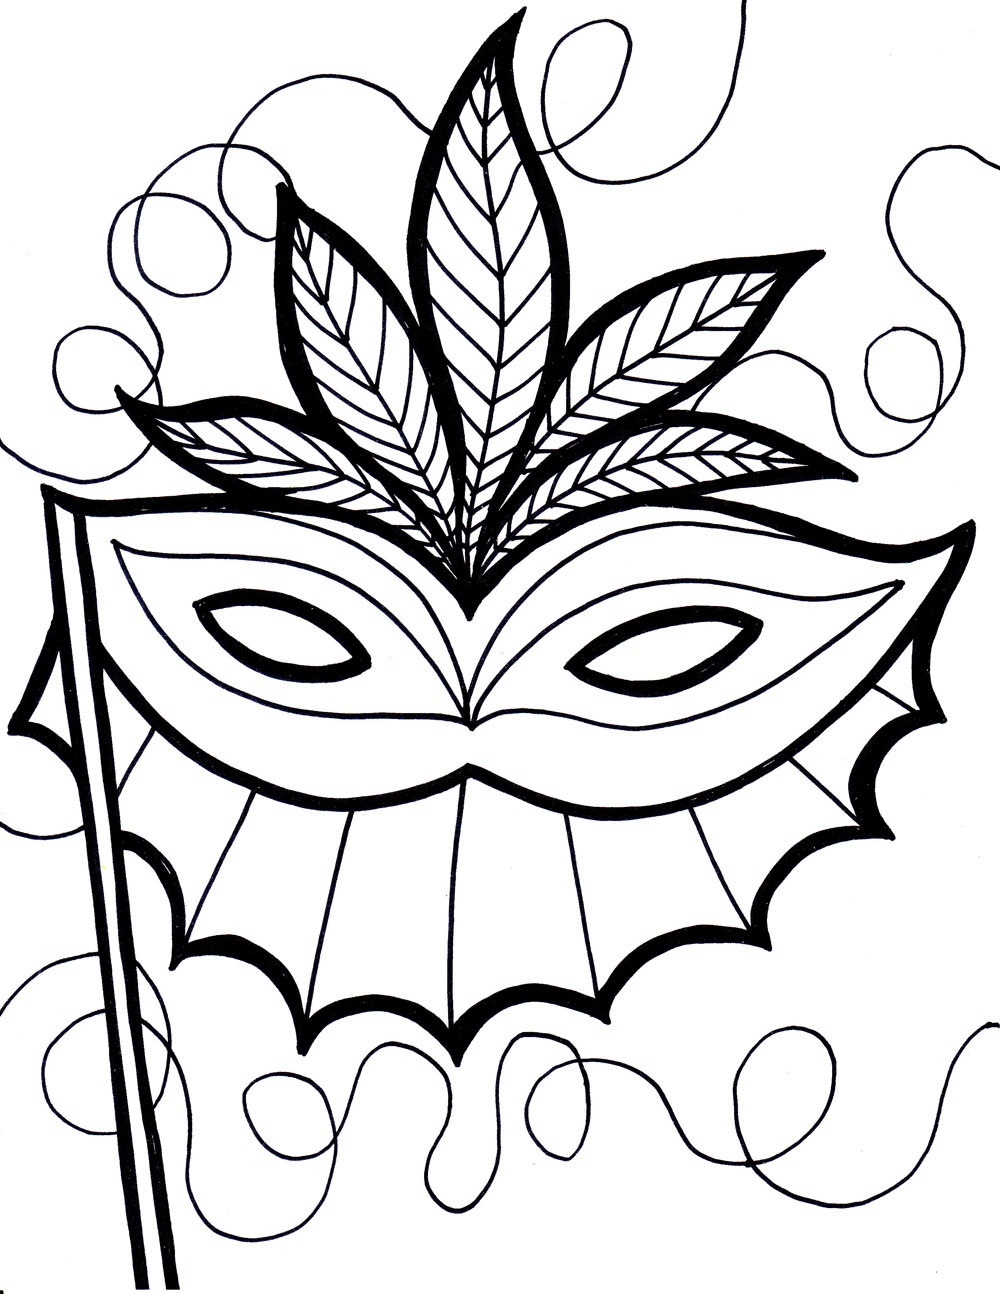 Printable Mask Coloring Pages | ColoringMe.com